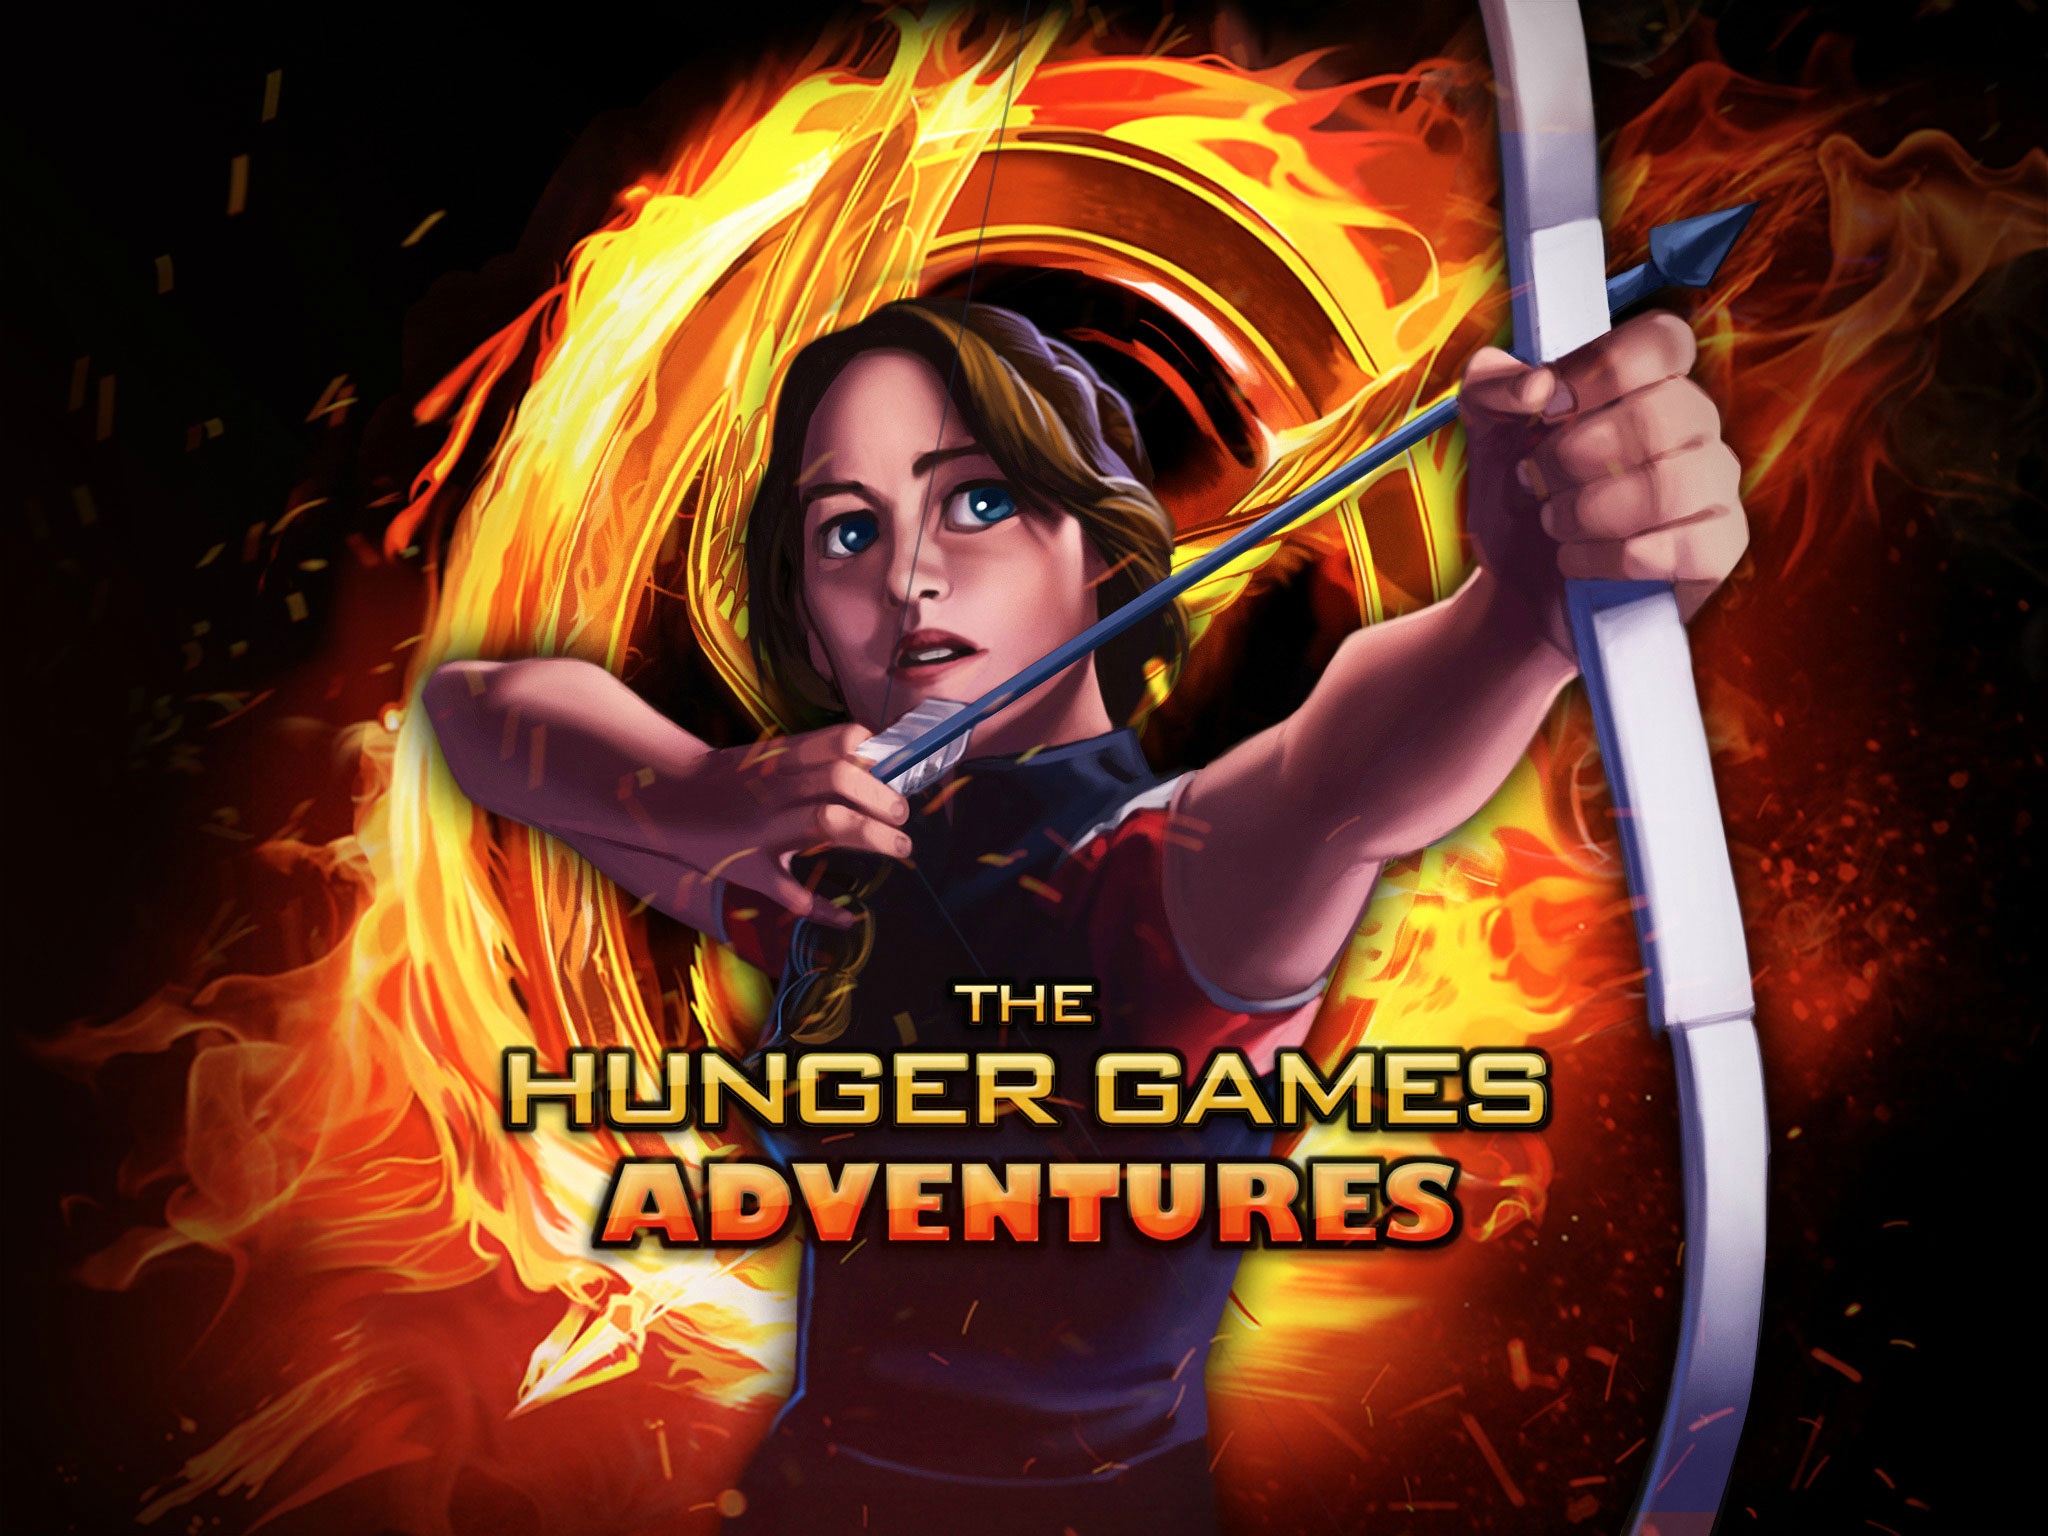 The Hunger Games Adventures | The Hunger Games Wiki | FANDOM powered ...